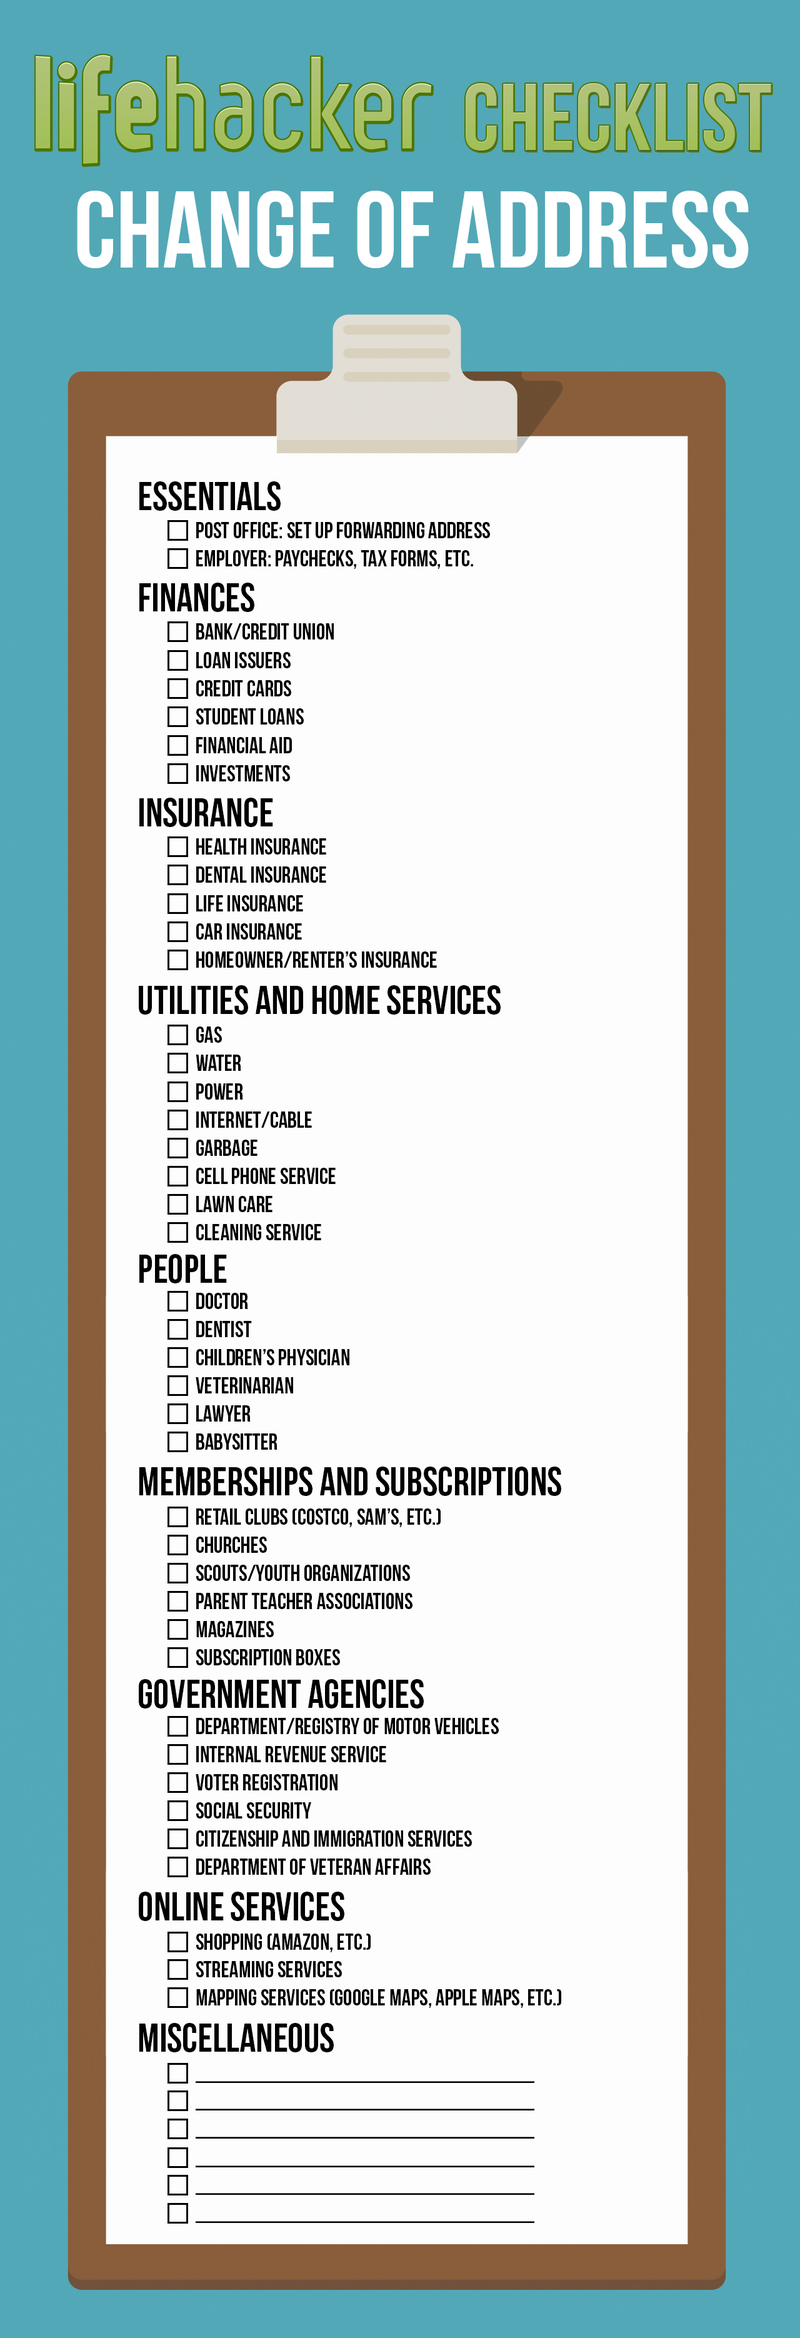 Change Your Address Everywhere On This Printable Checklist When You Move